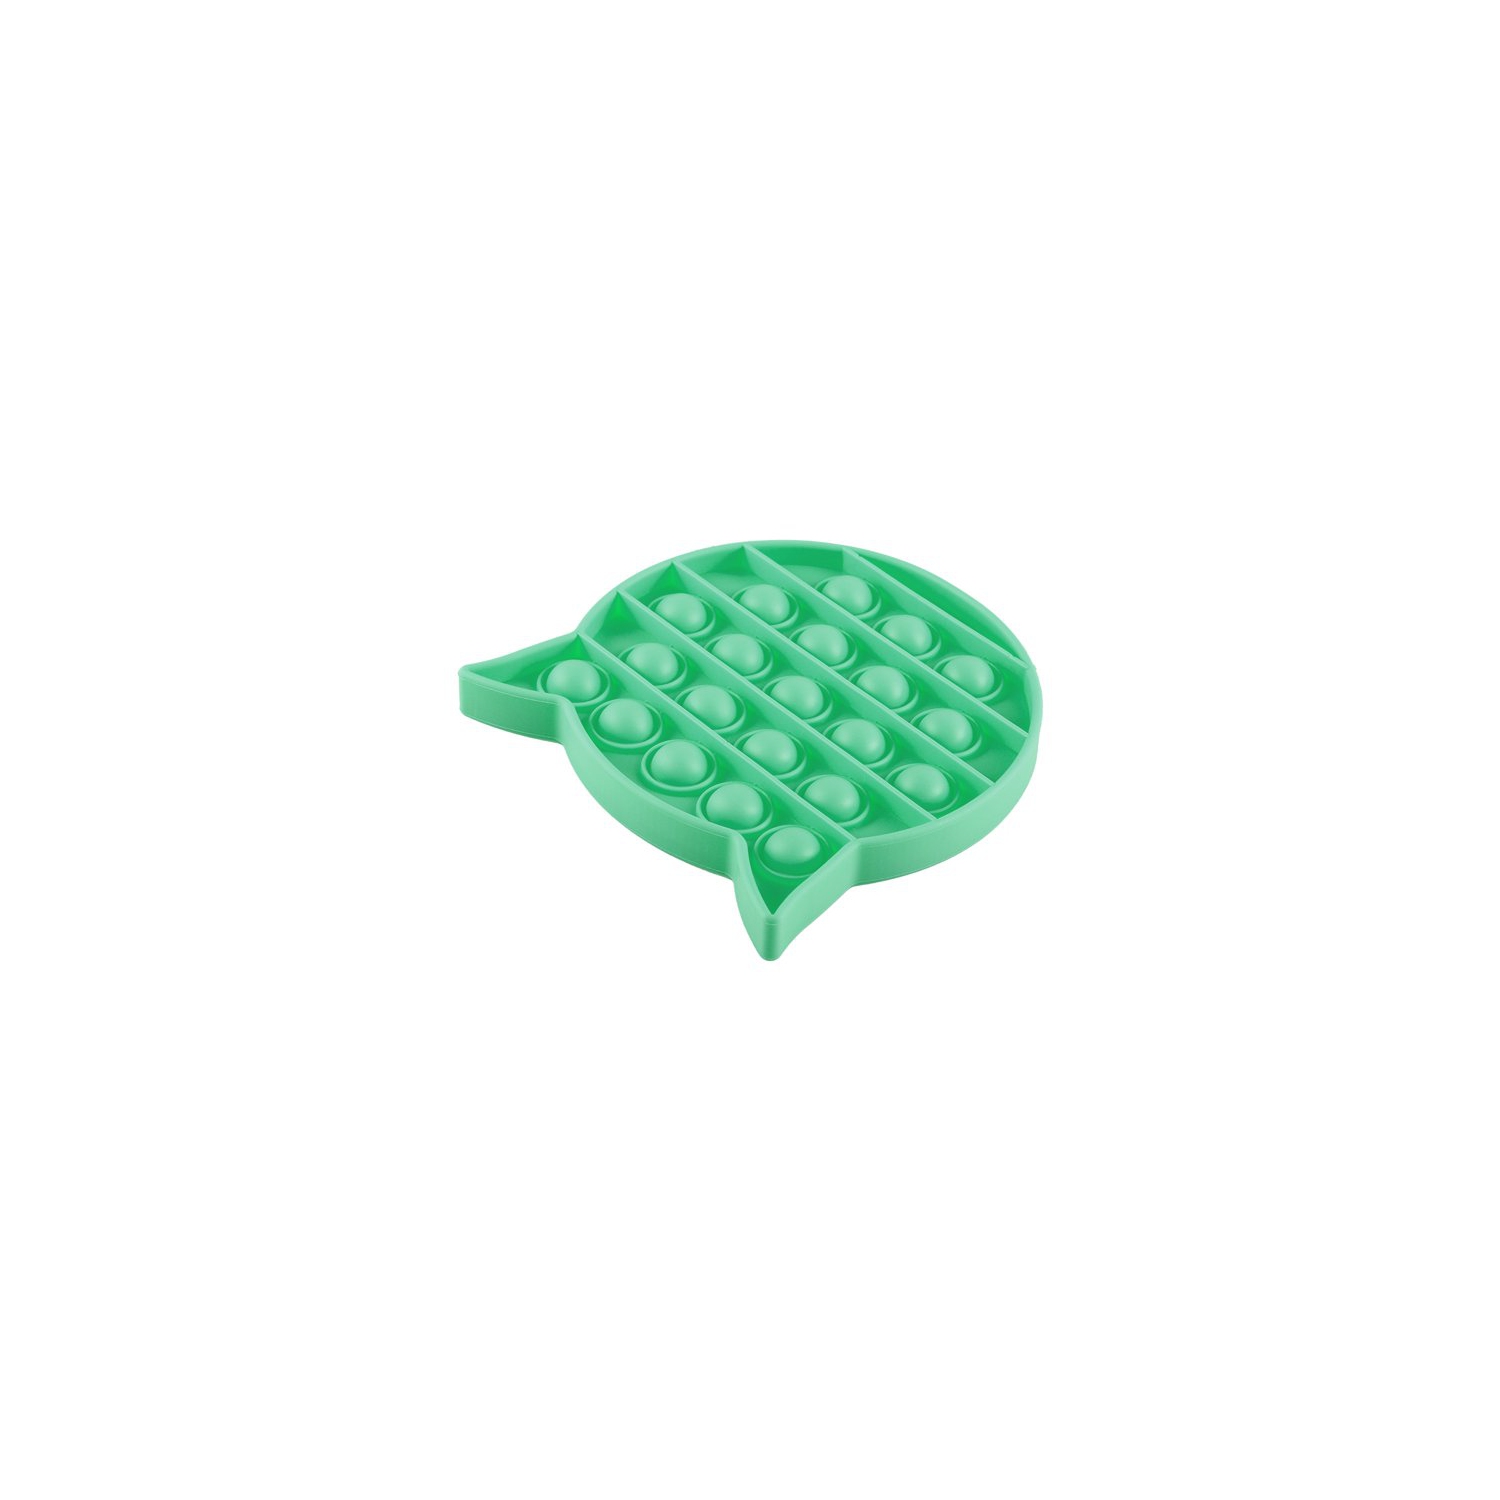 (CABLESHARK)Green Owl Push Pop Bubble Fidget Toy [Toys, Ages 3+](FREE SHIPPNG)